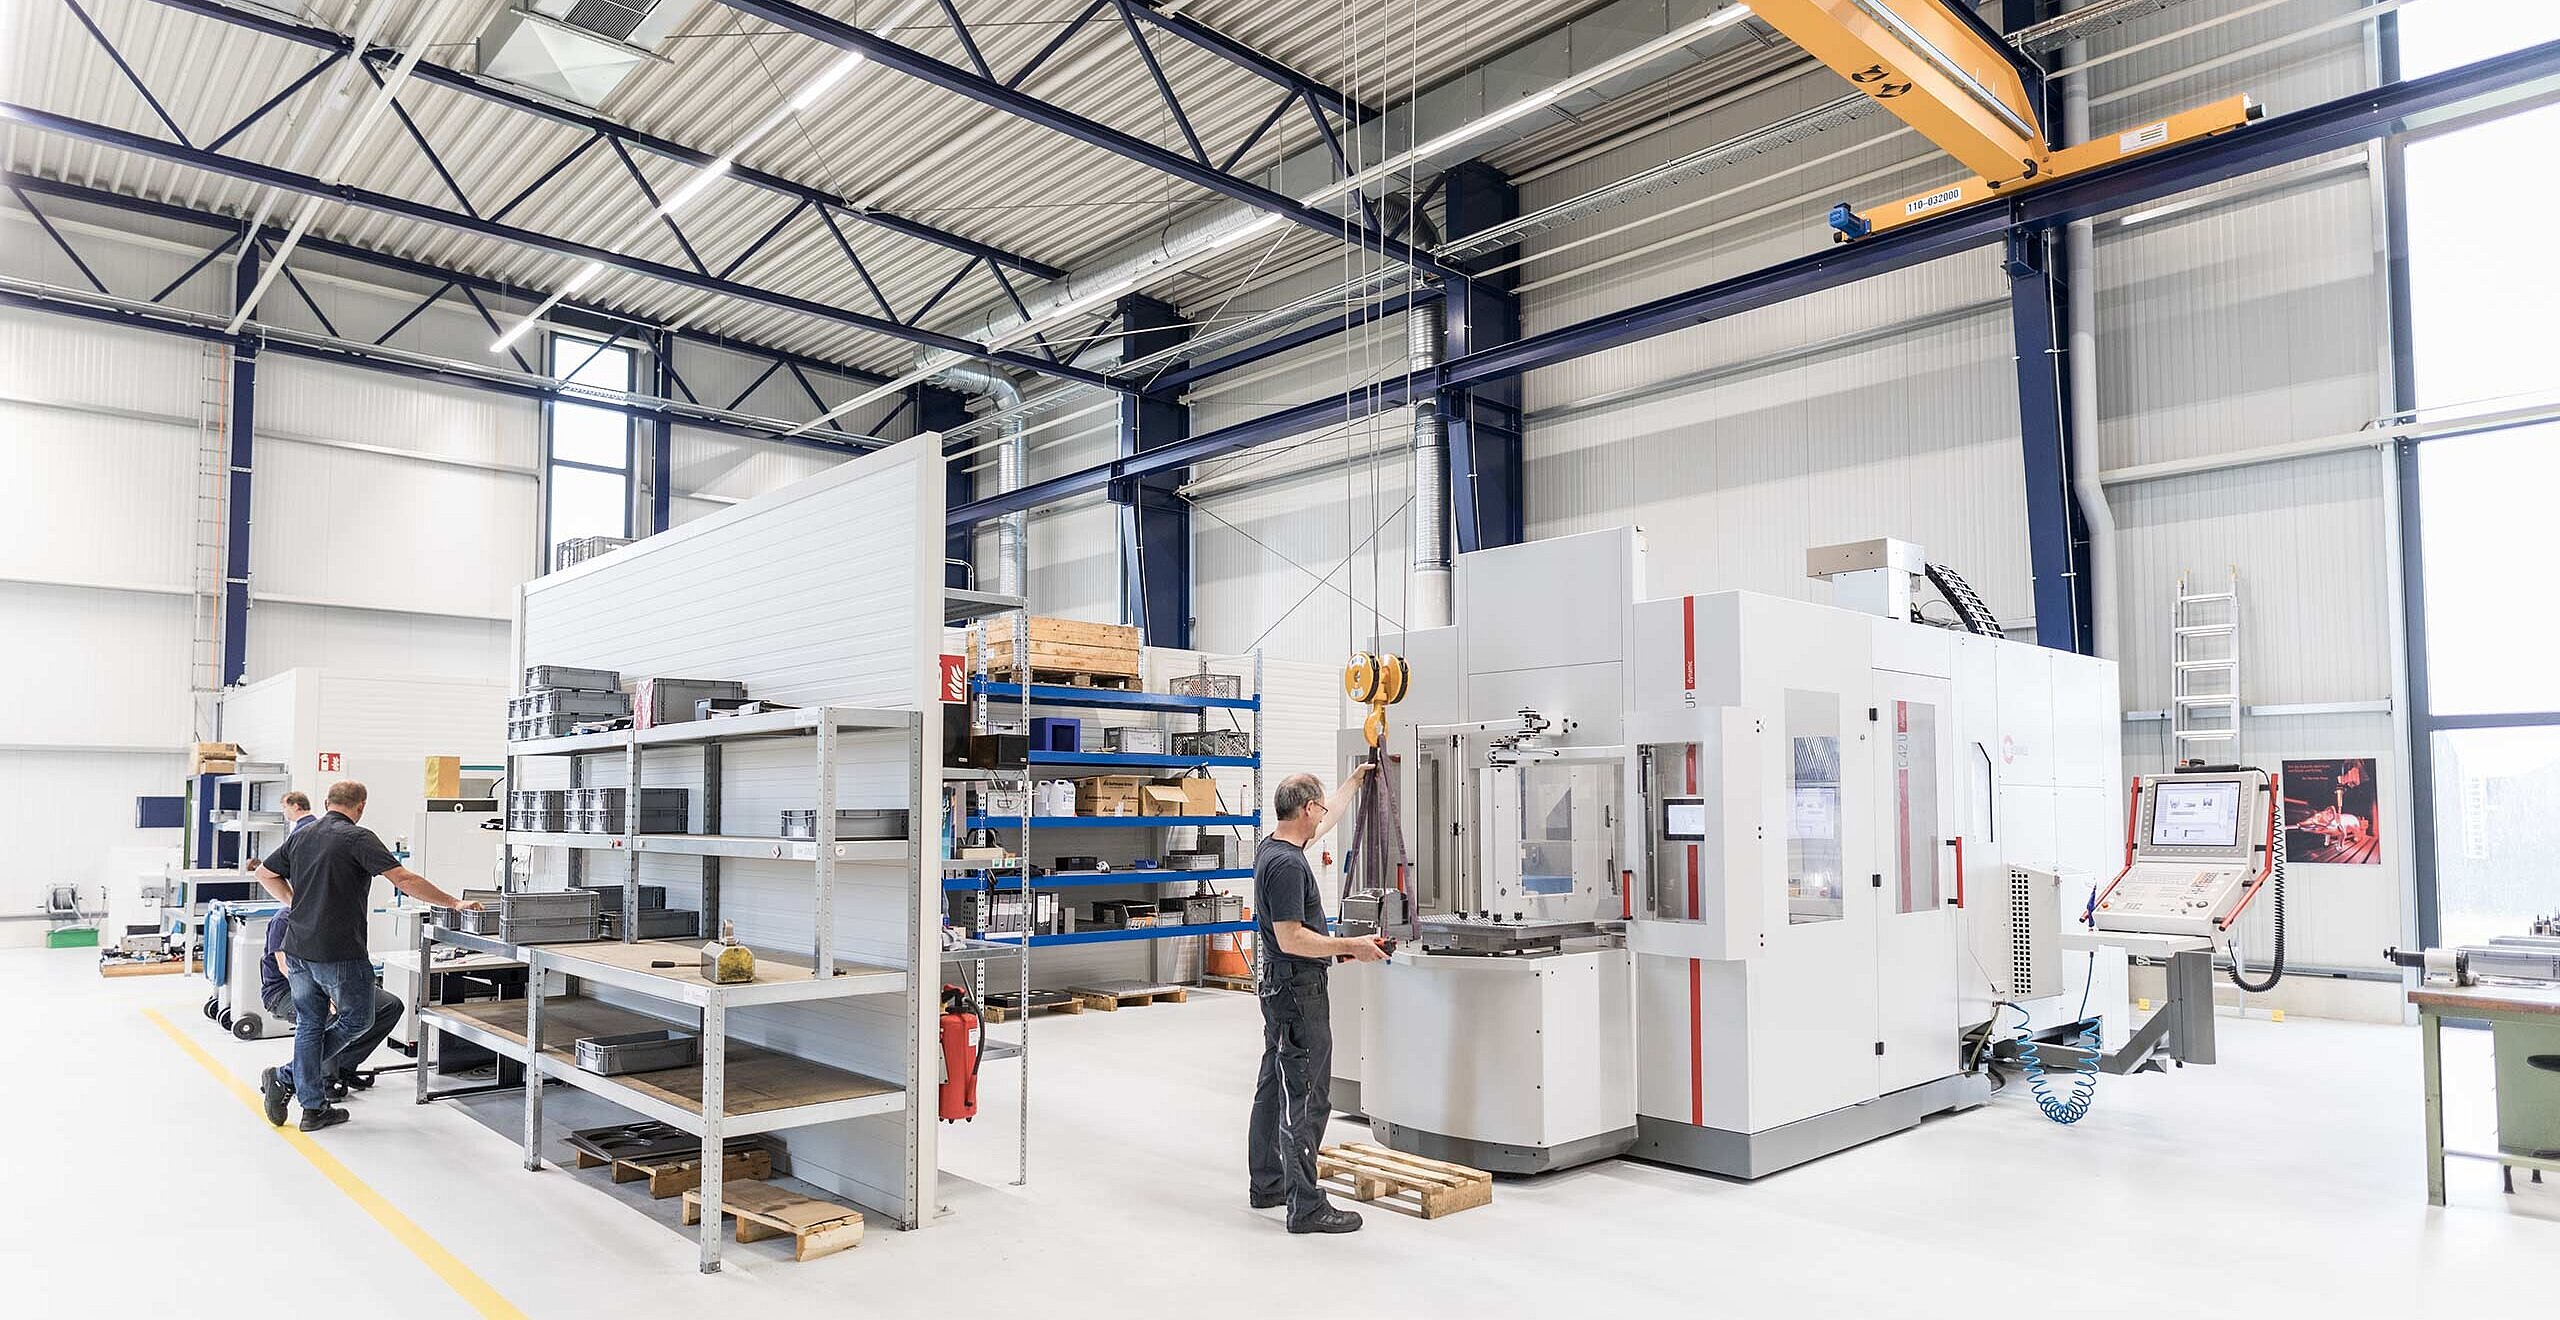 The Hermle machining centre at µ-Tec GmbH in Chemnitz, consisting of a 5-axis machining centre C 42 UP and a PW 850 pallet changer with front sided setup station PW 850.